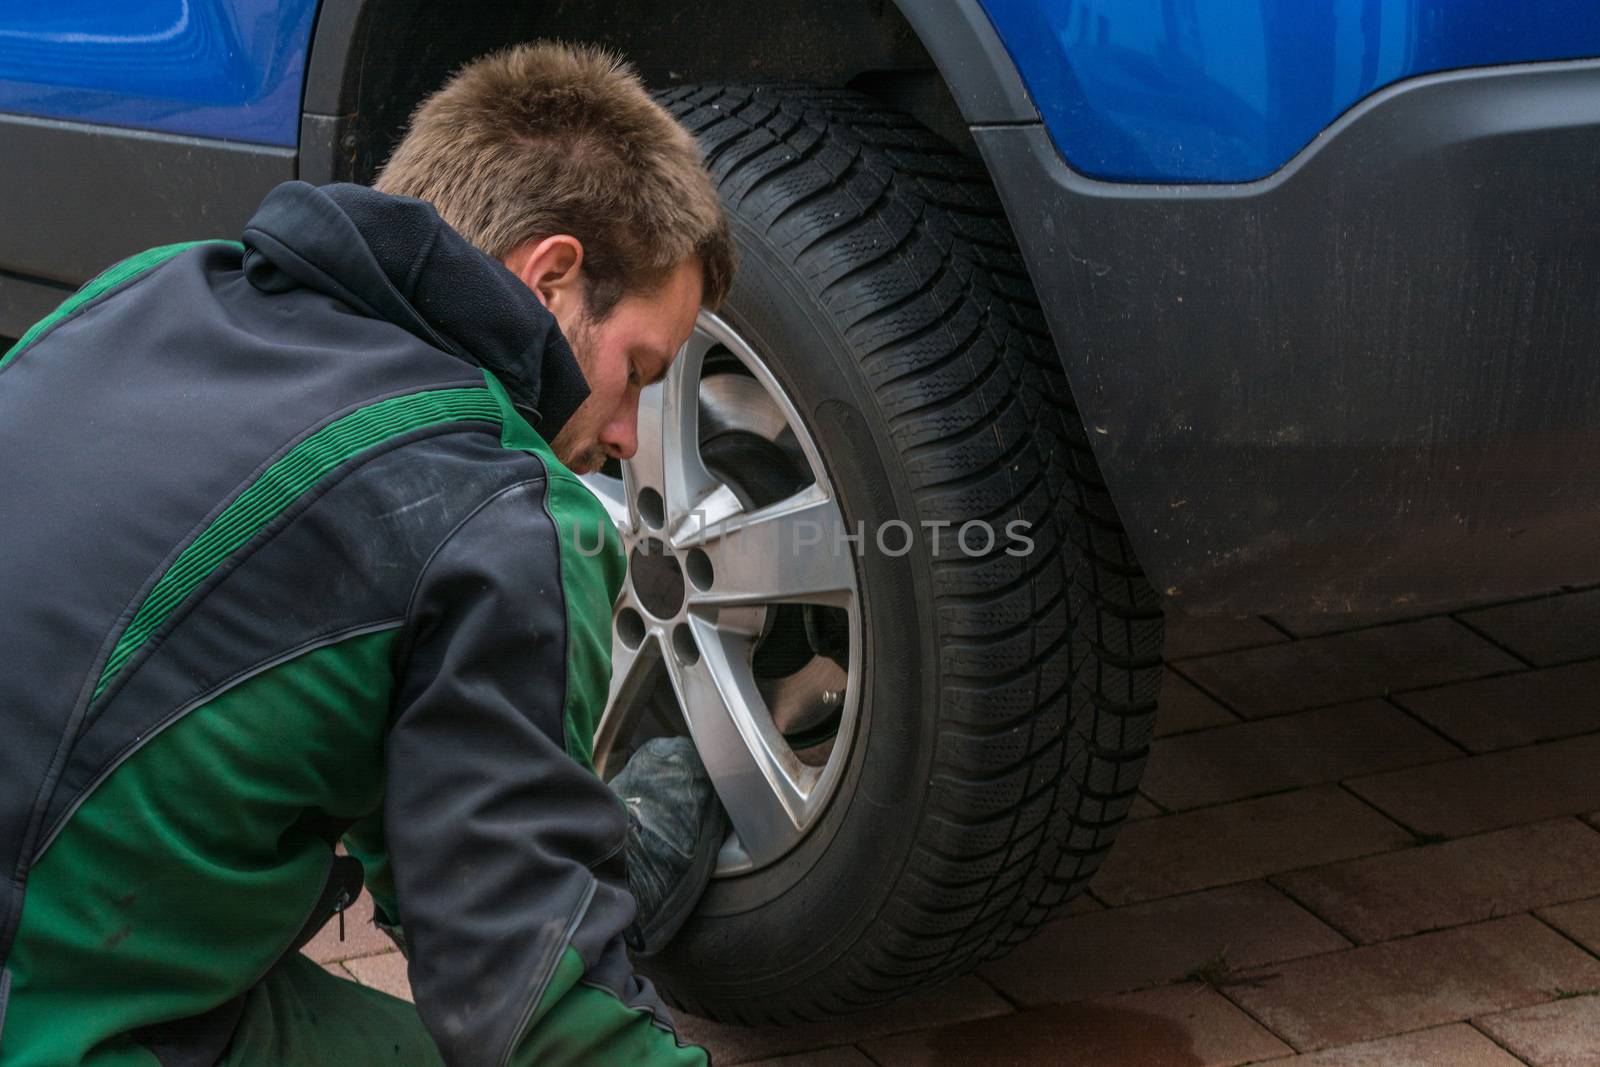 Replace summer tires against winter tires   by JFsPic